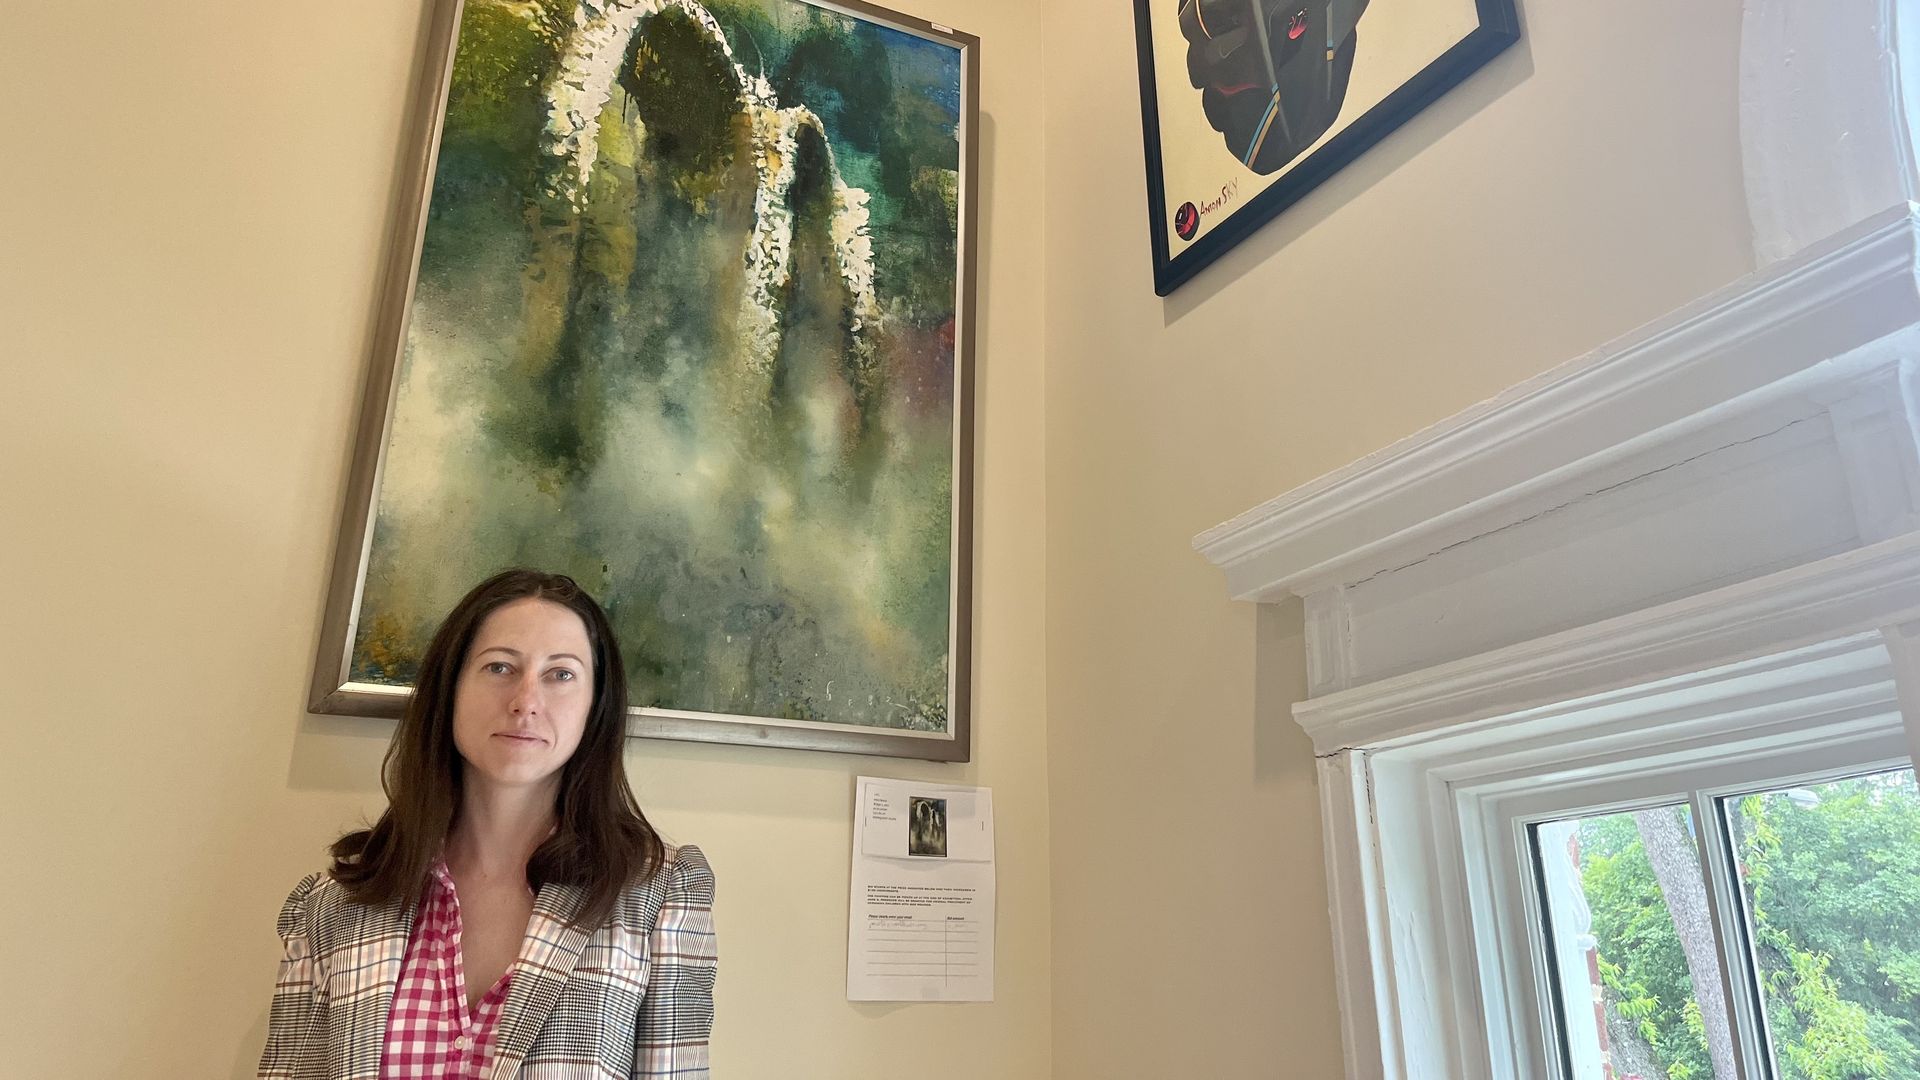 Ukraine House director stands in front of two paintings